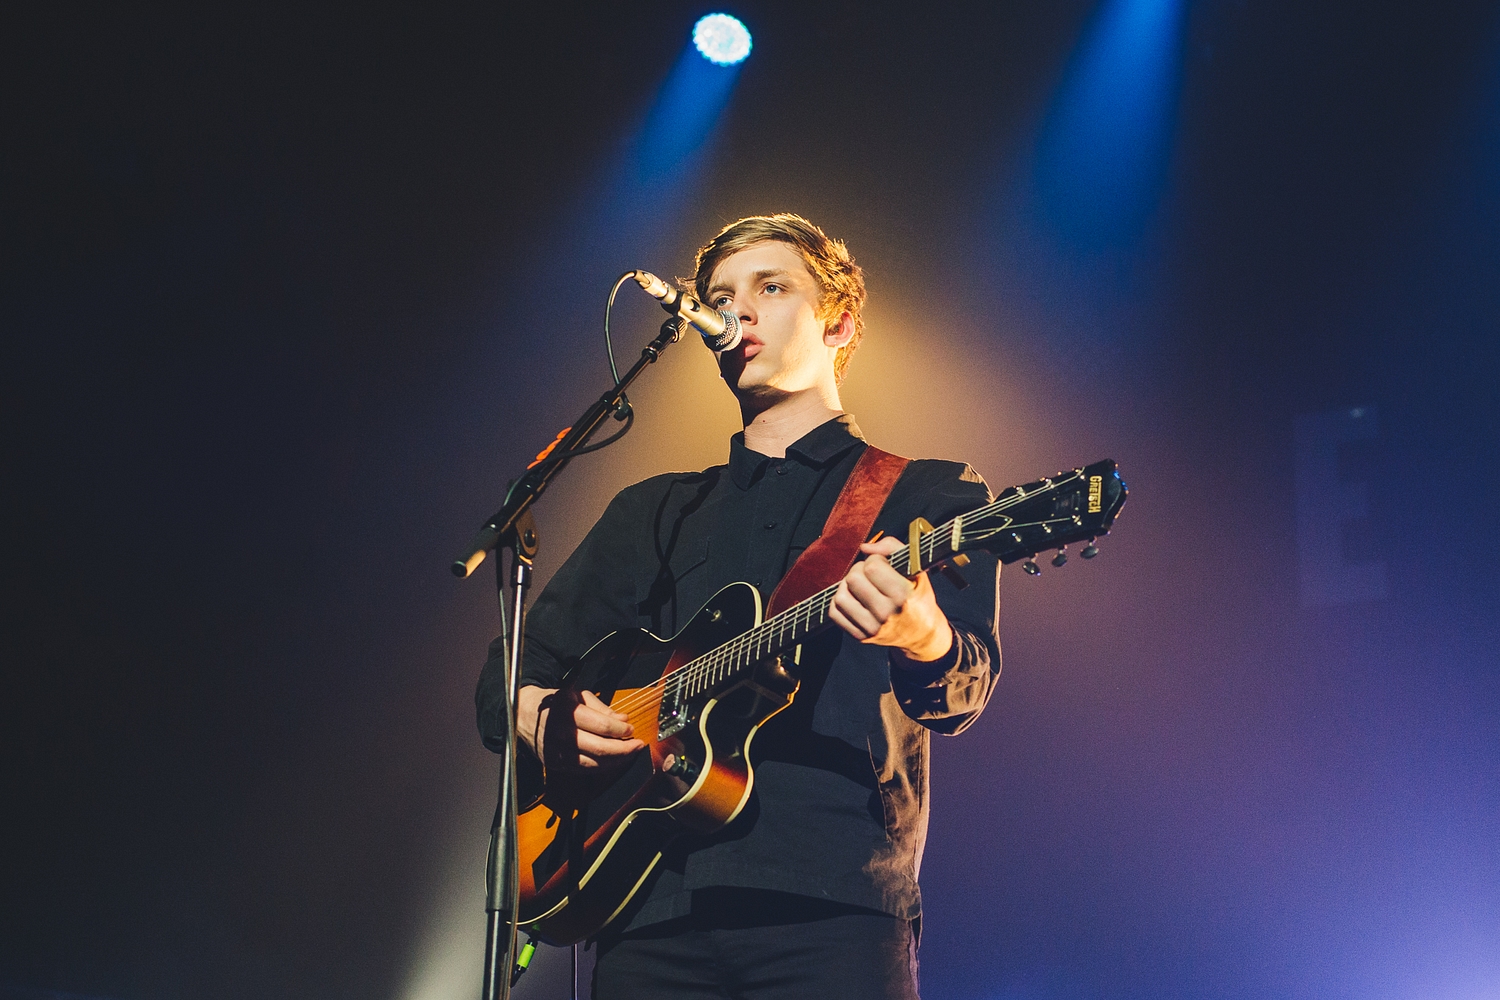 George Ezra announces Paul Weller, Paloma Faith, Lianne La Havas and more to perform at special charity show